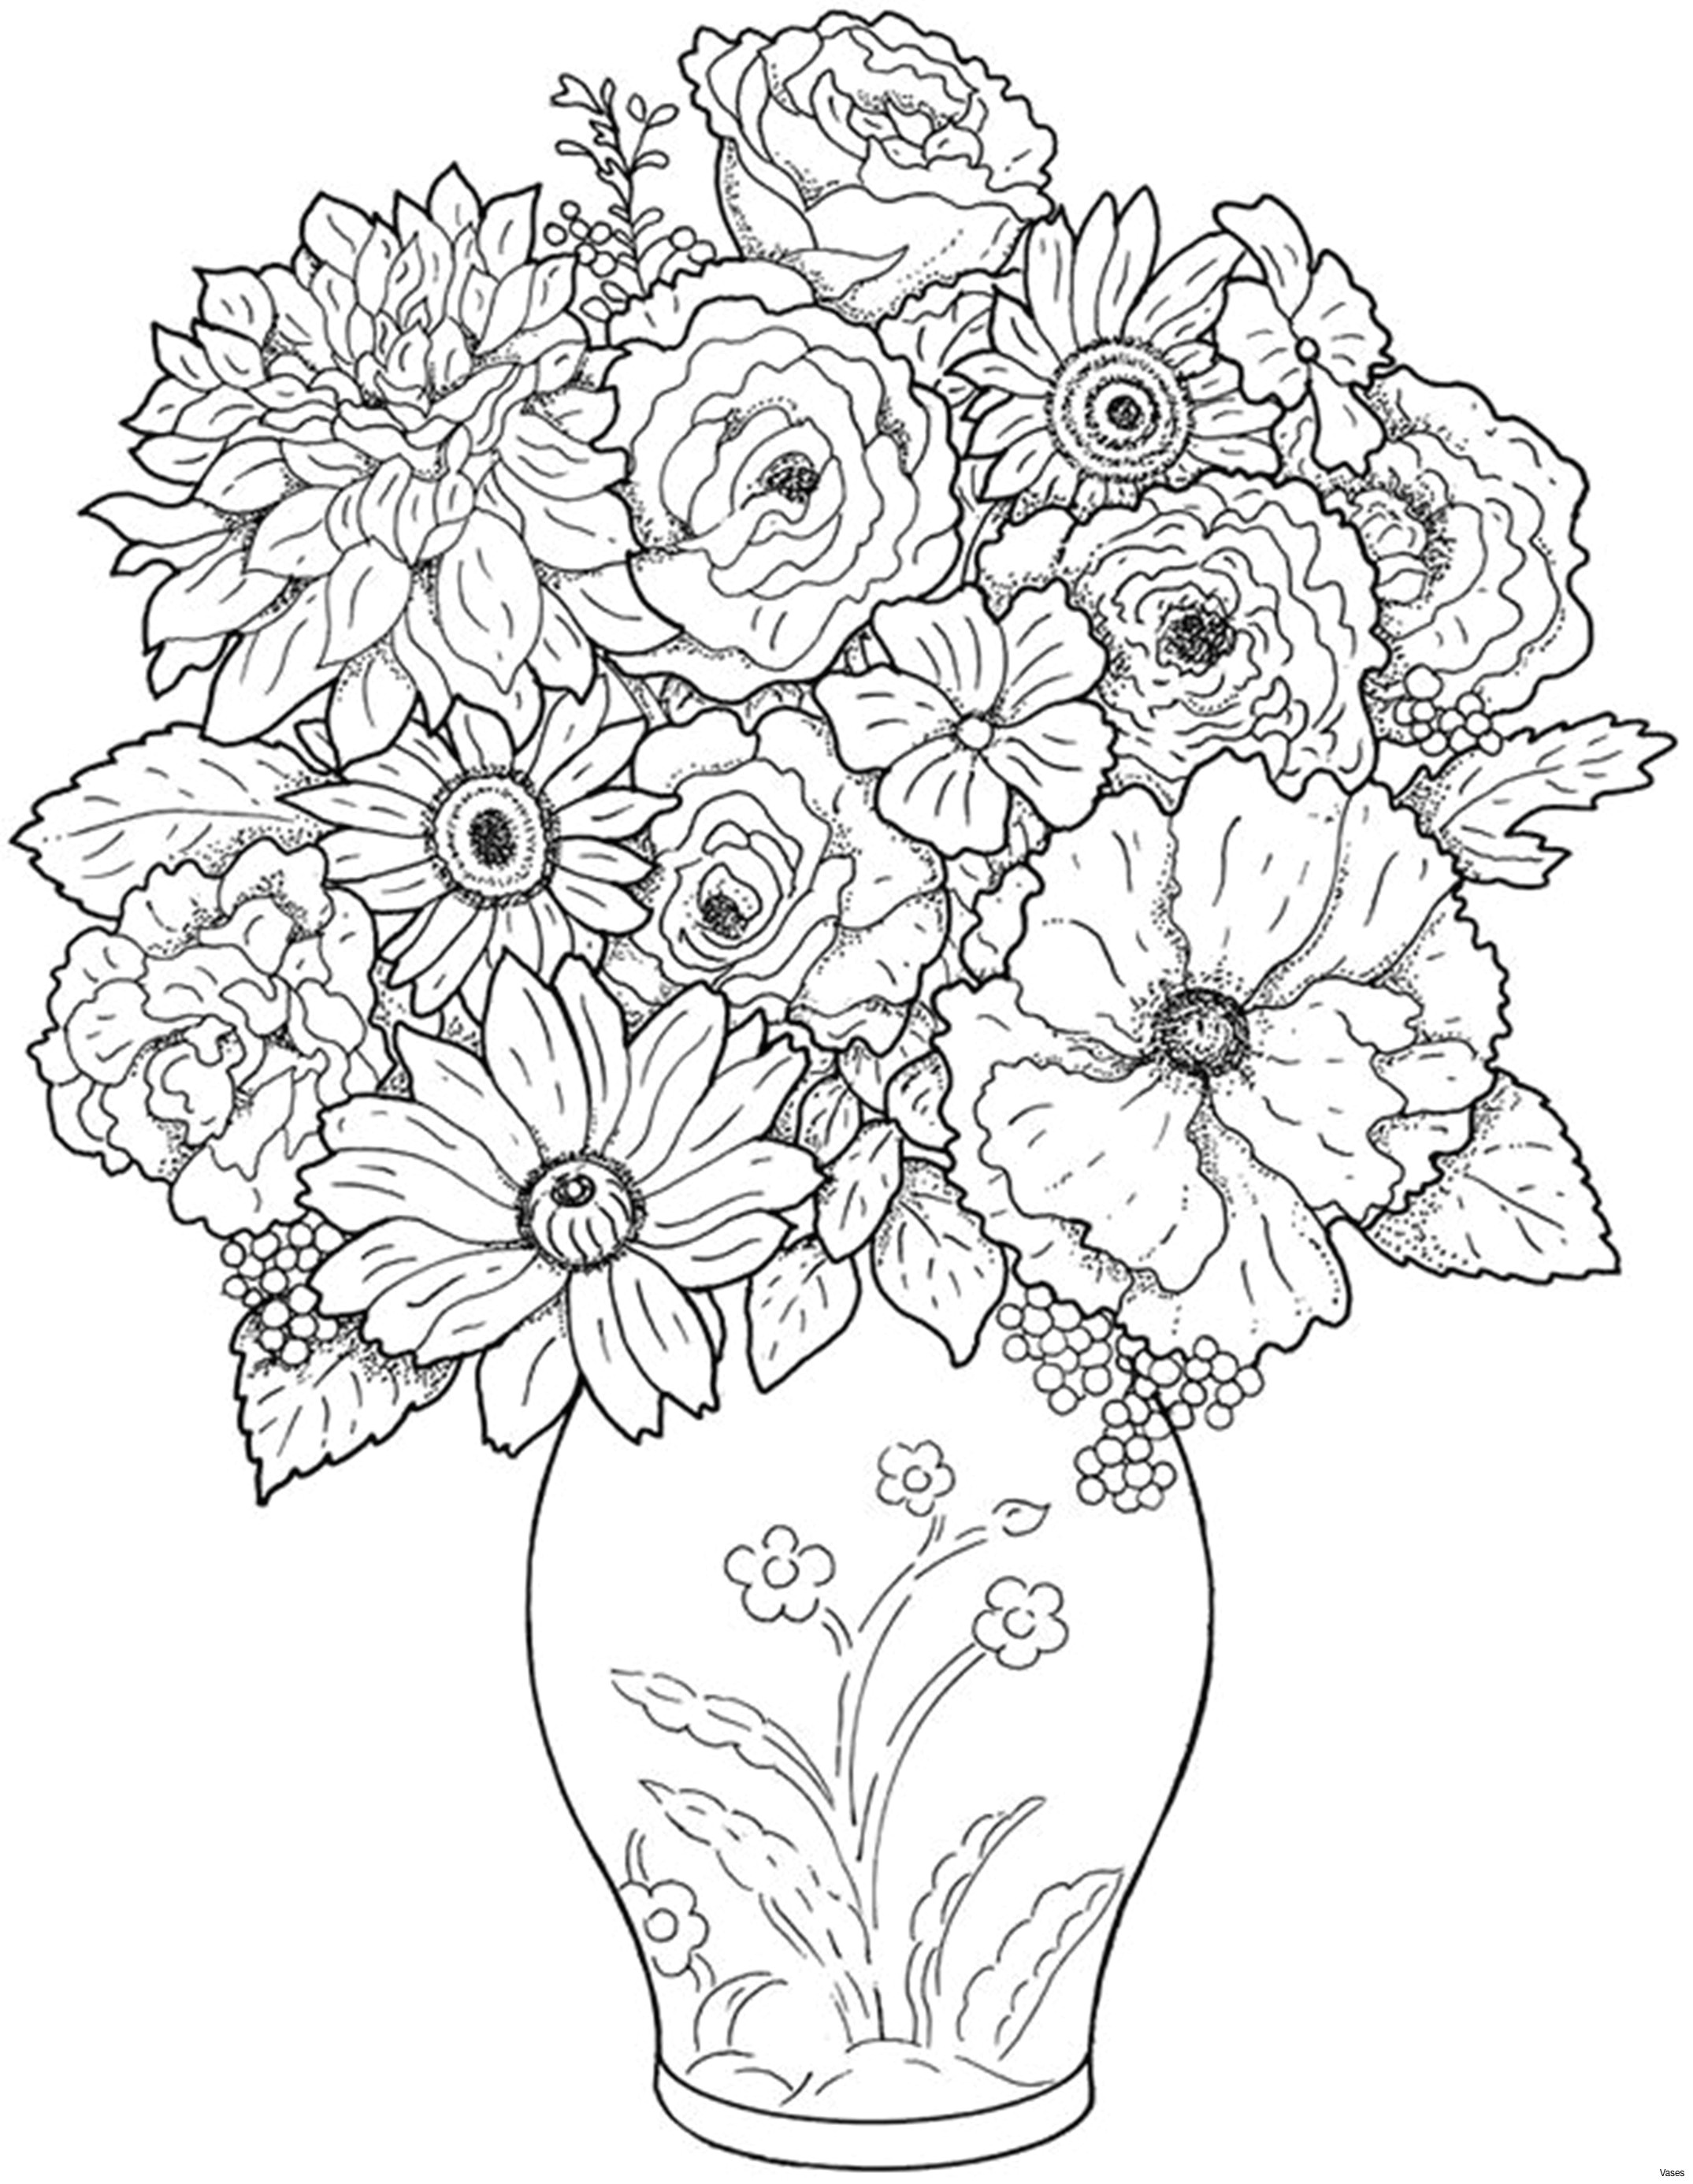 The Best Drawings Of Flowers Www Colouring Pages Aua Ergewohnliche Cool Vases Flower Vase Coloring